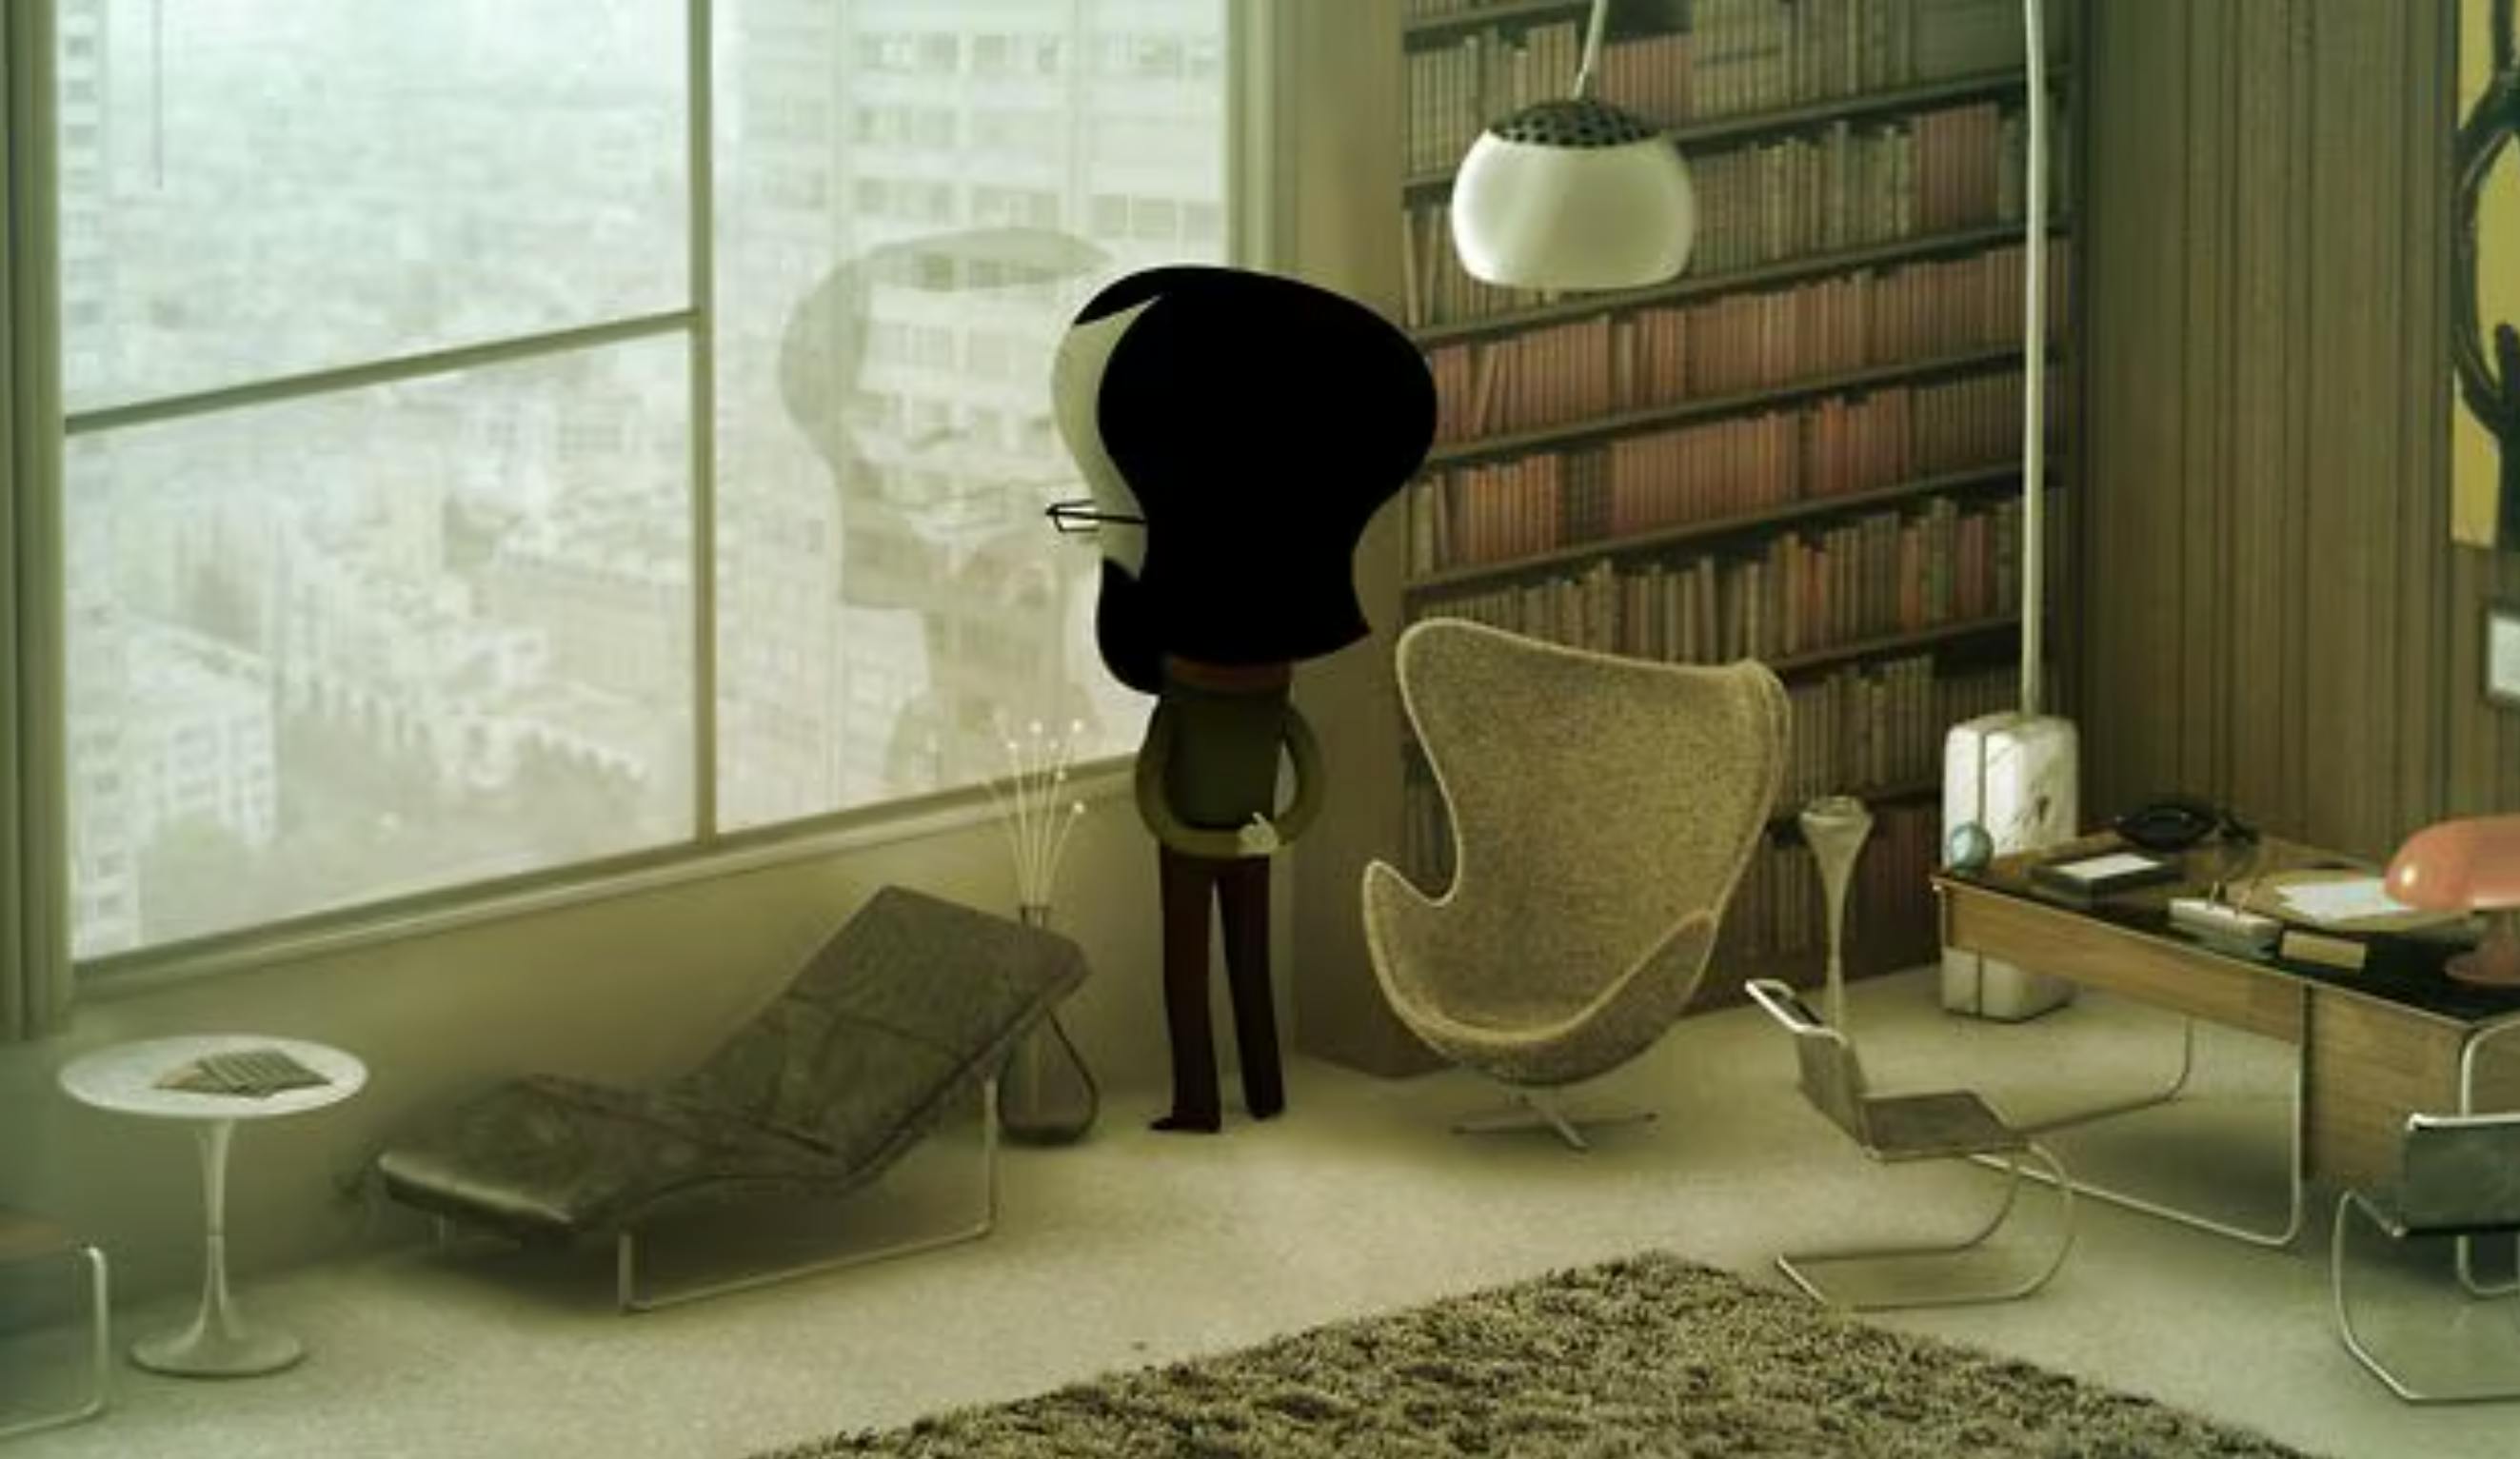 3d rendered image of an office in a high tower. There is a bookcase to the right of a very large window. In front of the window is a man, looking out of the window. He has a lightbulb-shaped head, glasses, and has his arms behind him as he contemplates. from Jeremy Clapin’s Skhizein (2008)